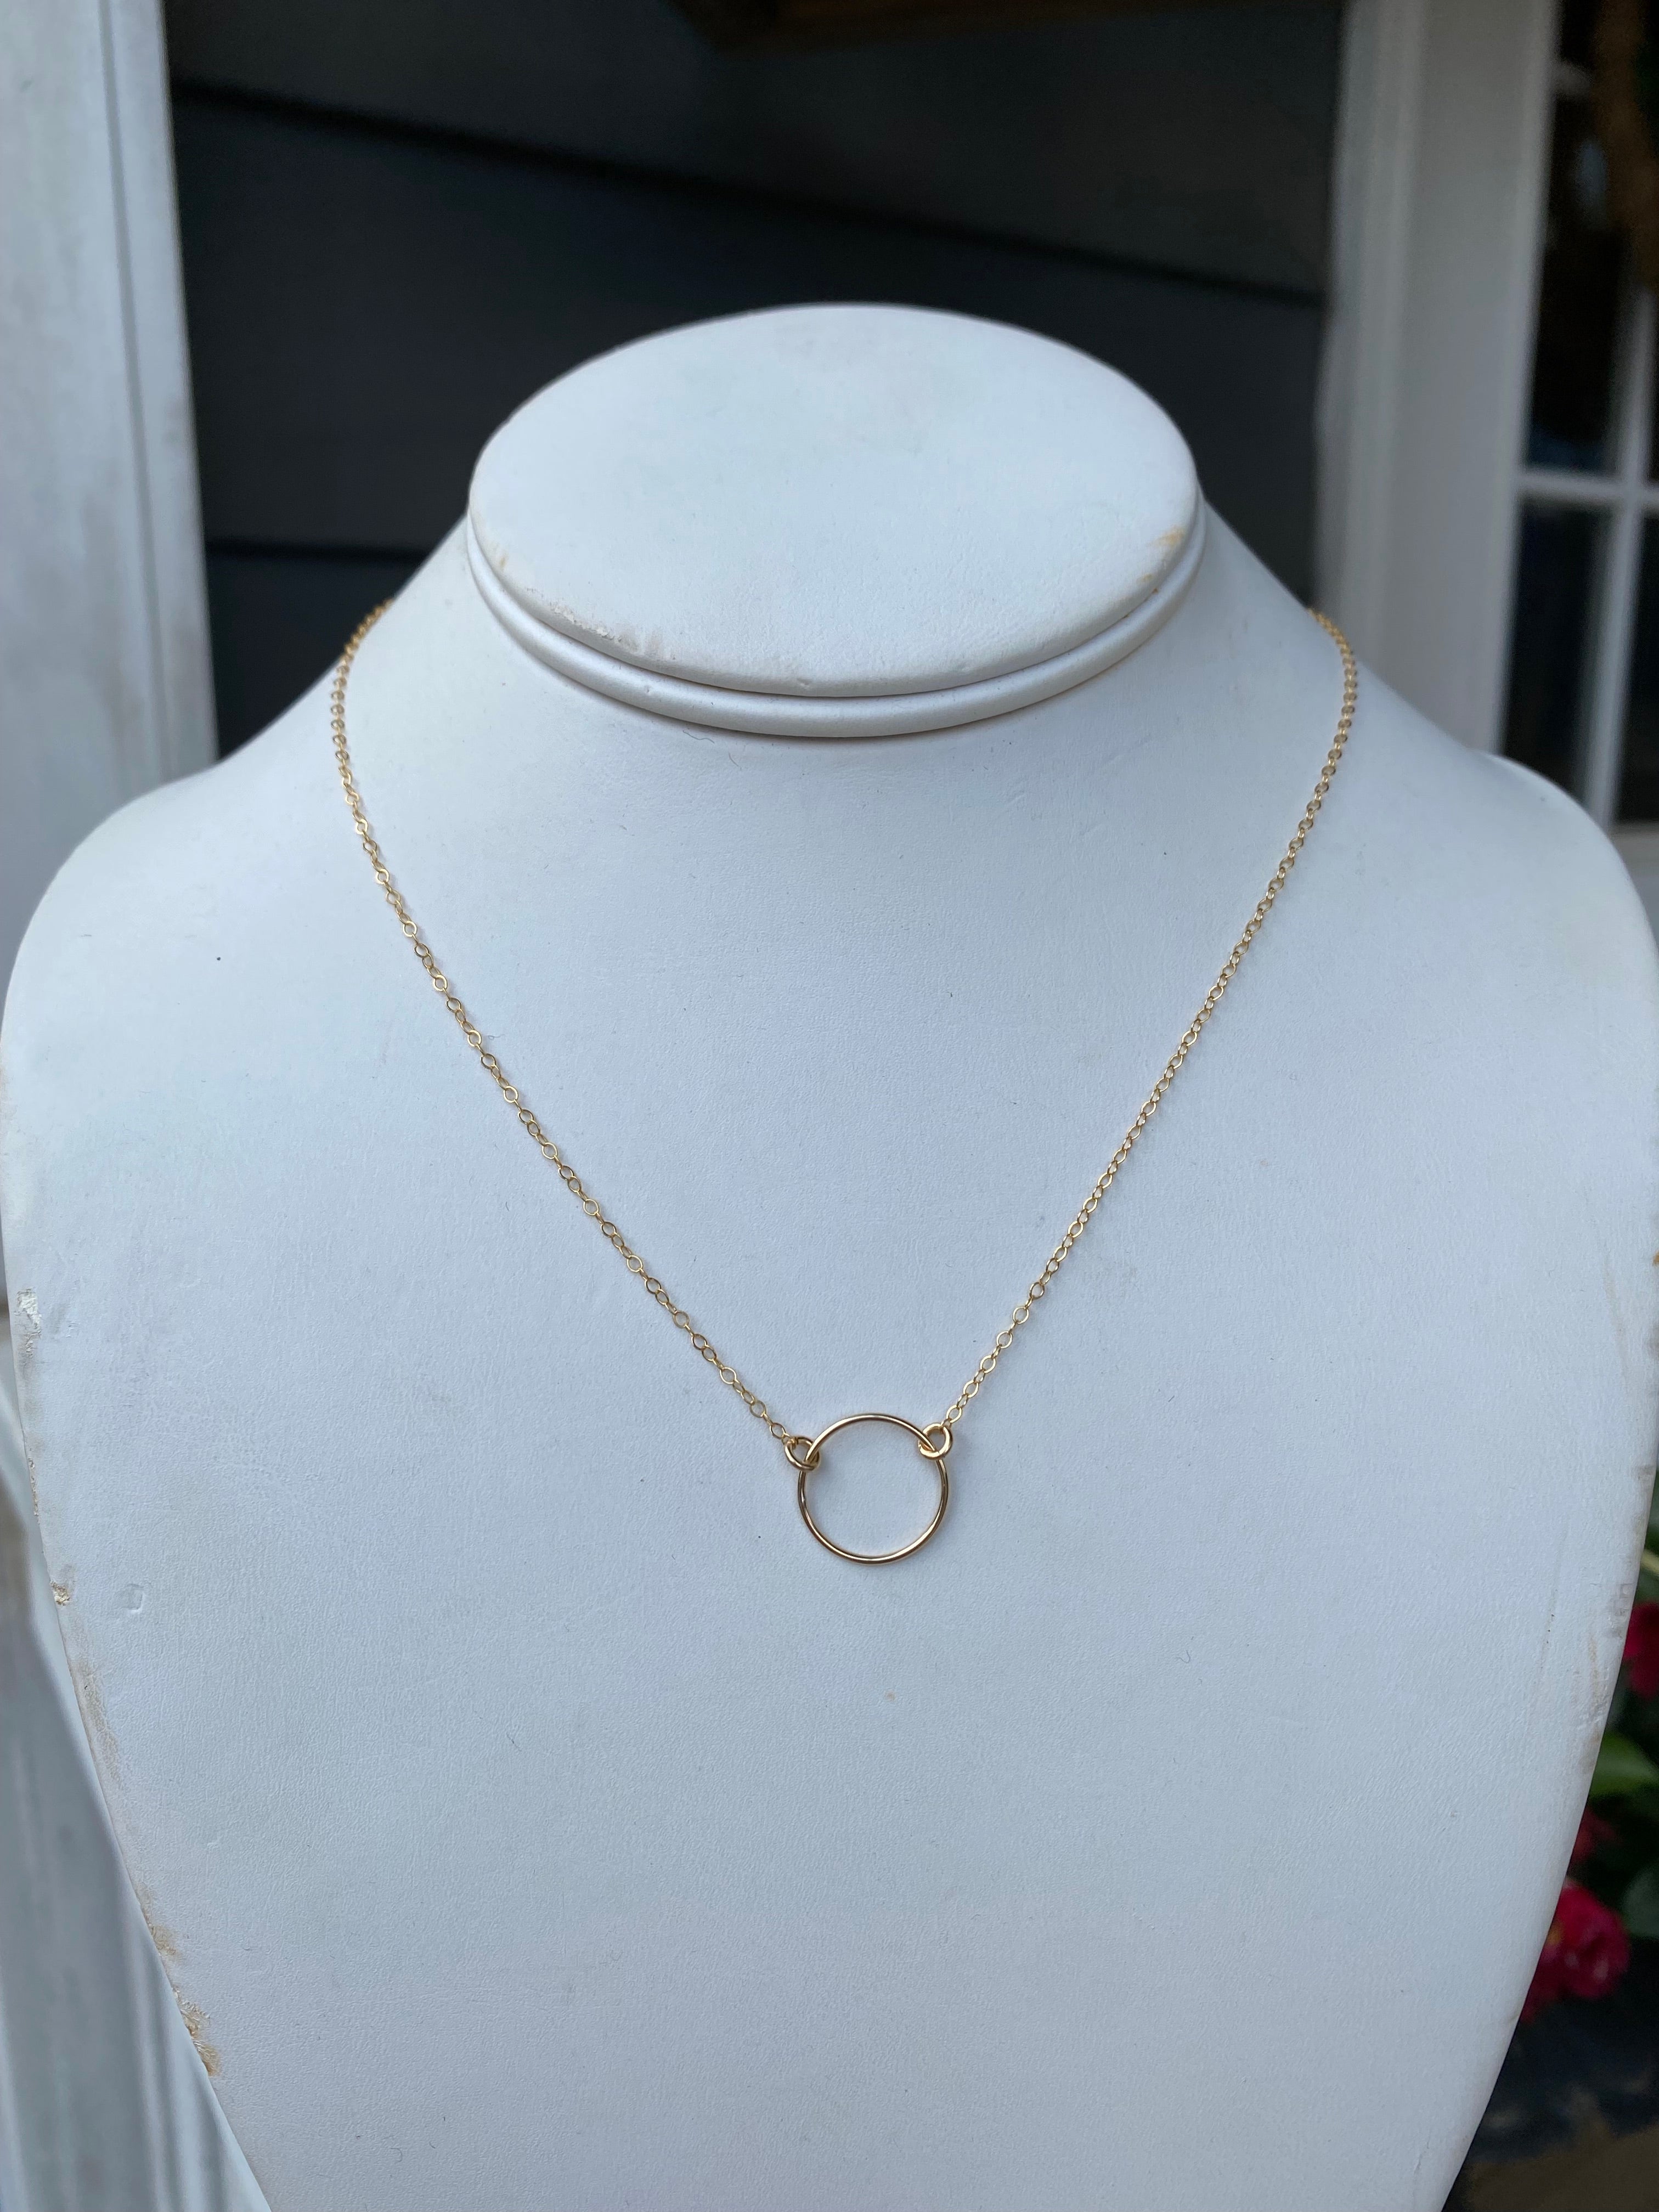 Dainty Gold Necklace w/ Hoop